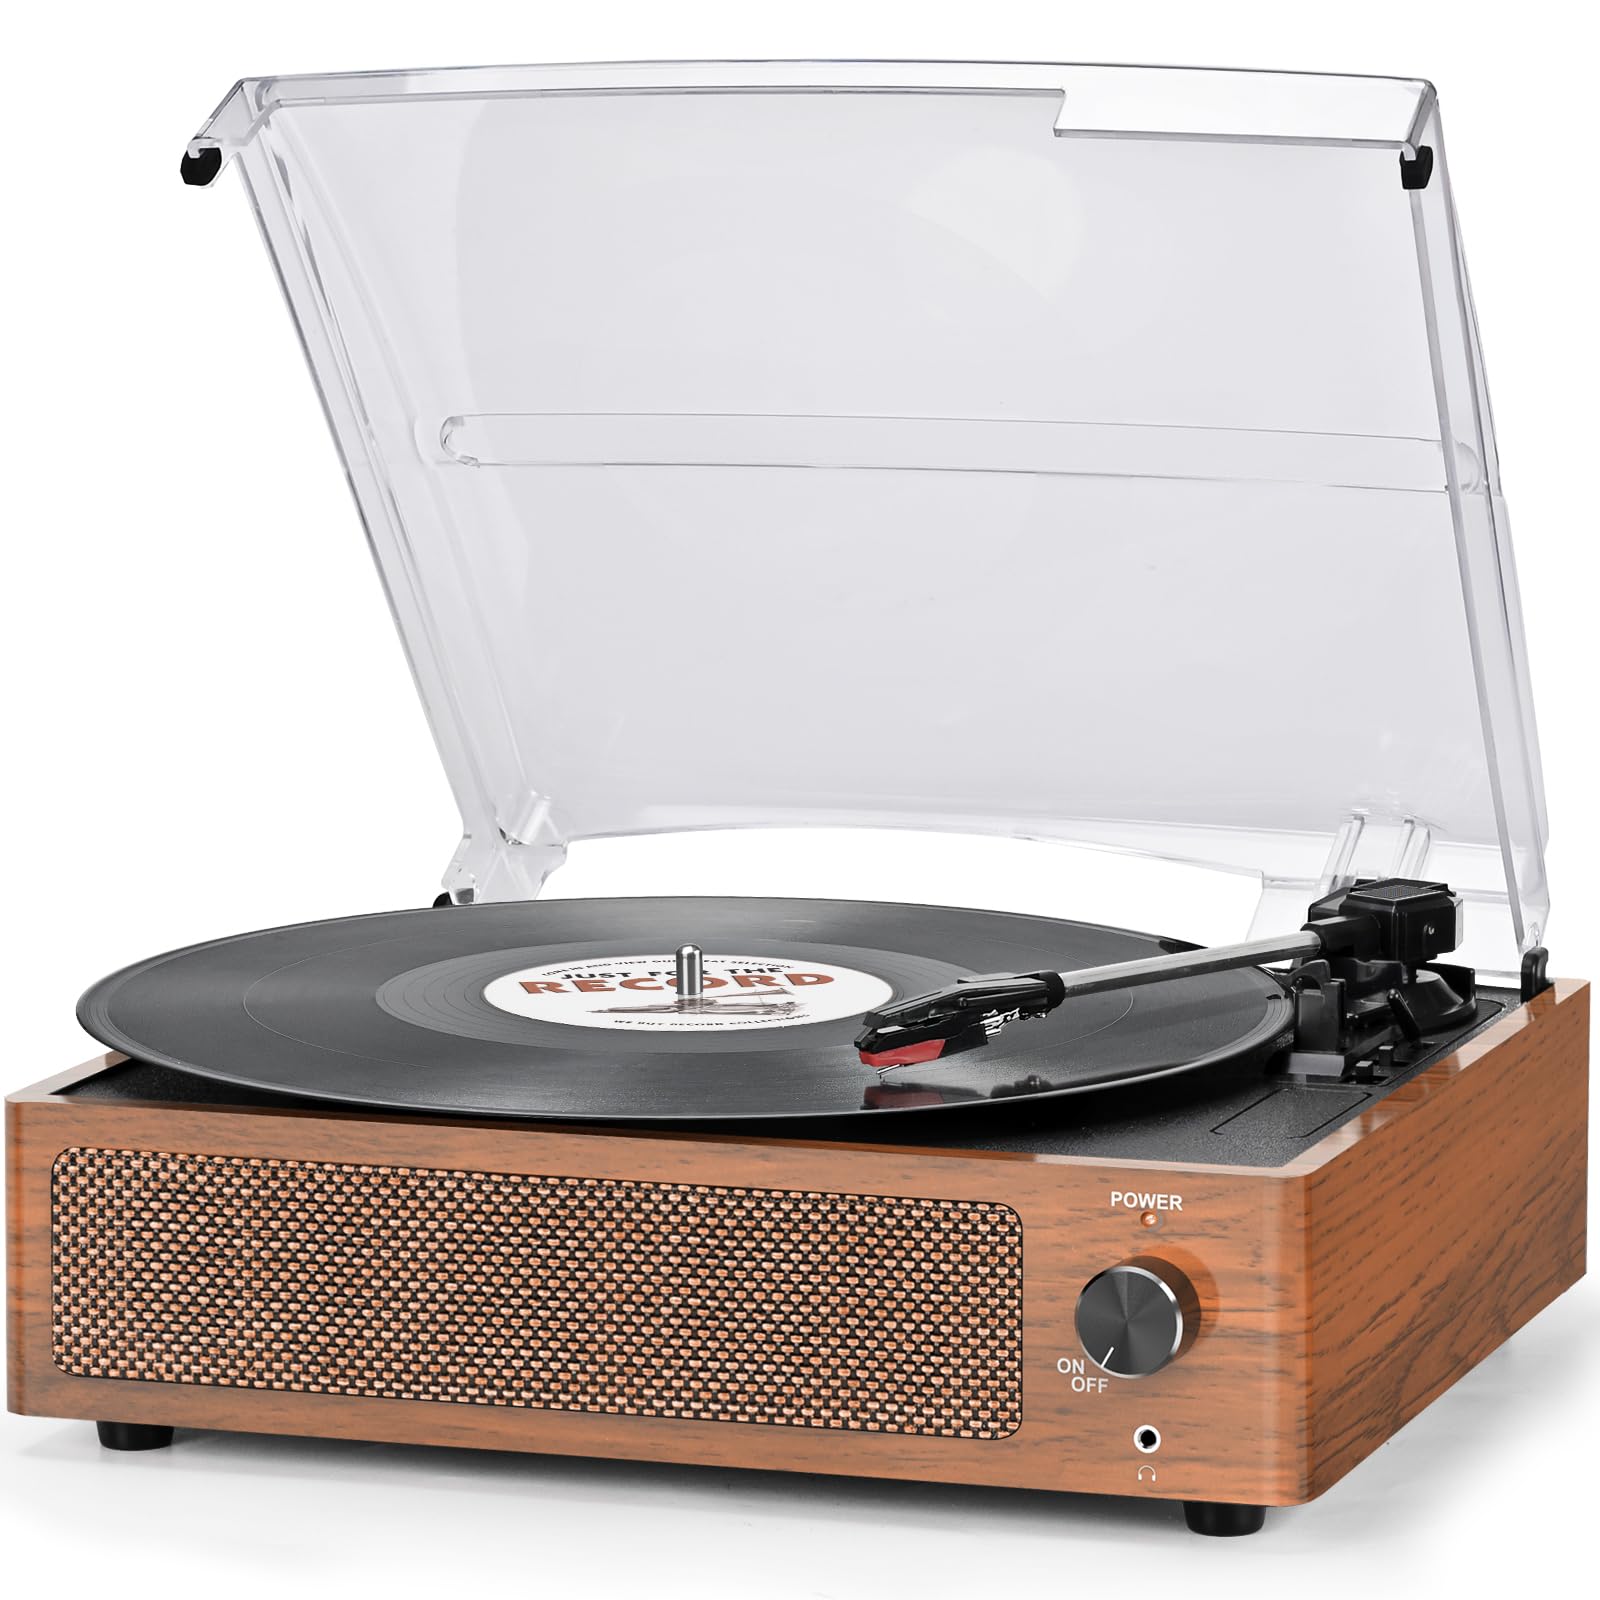 Vinyl Record Player with Speakers Vintage Turntable for Vinyl Records Belt-Driven Turntable Support 3-Speed Bluetooth Playback Headphone AUX RCA Line LP Vinyl Players for Sound Enjoyment Retro Brown